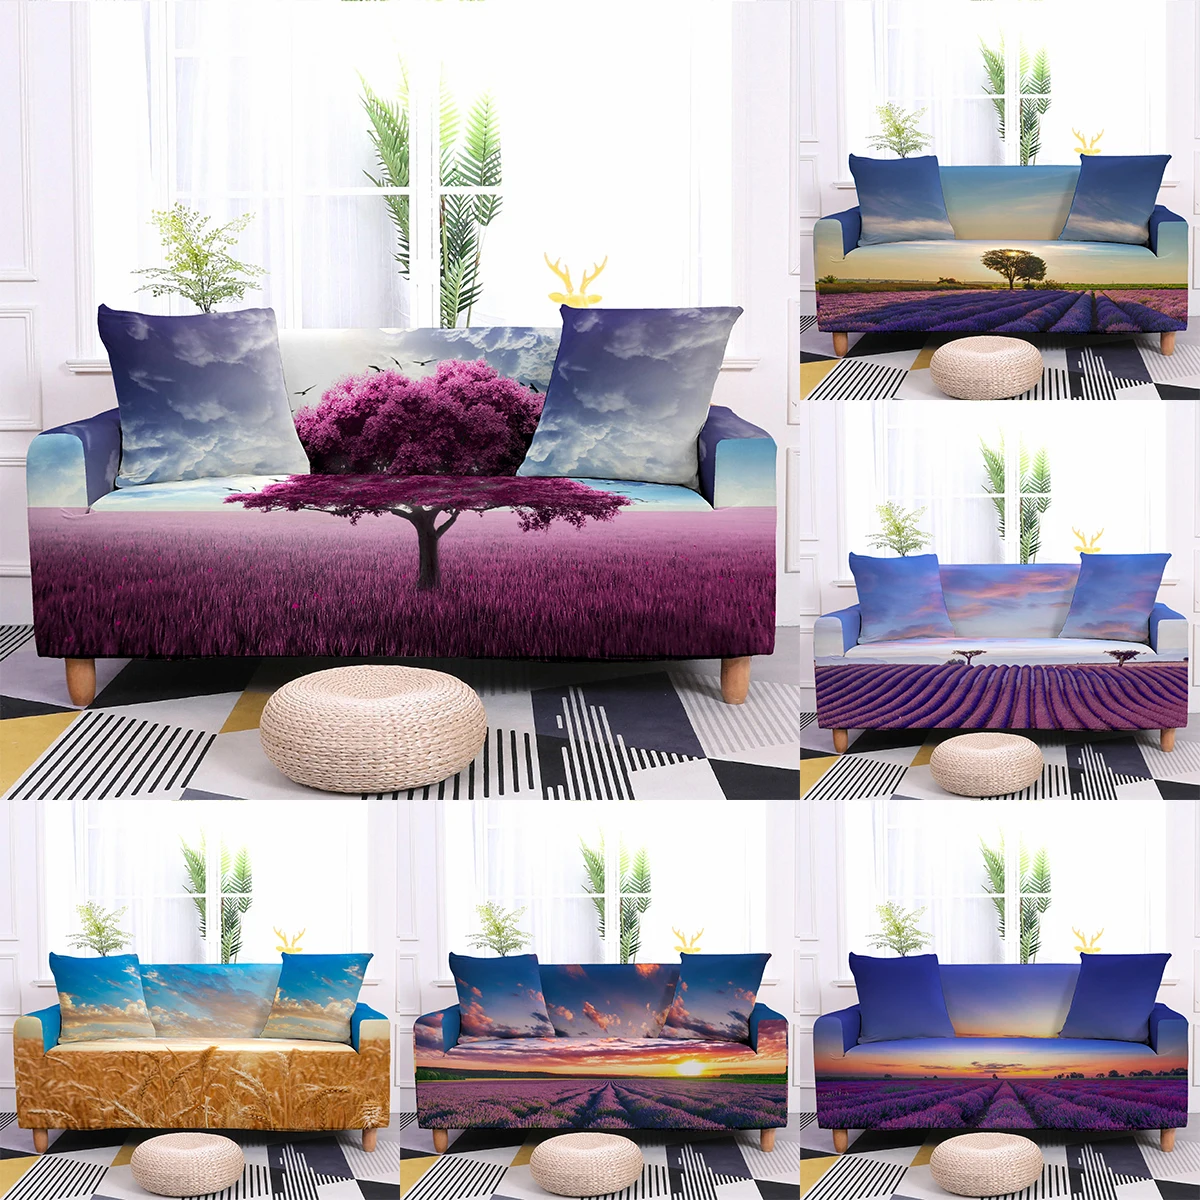 

Lavender Manor Elastic Sofa Cover Pastoral Scenery Purple Floral Couch Covers Tree Sunset Glow Landscape Sofa Slipcover 1-4 Seat